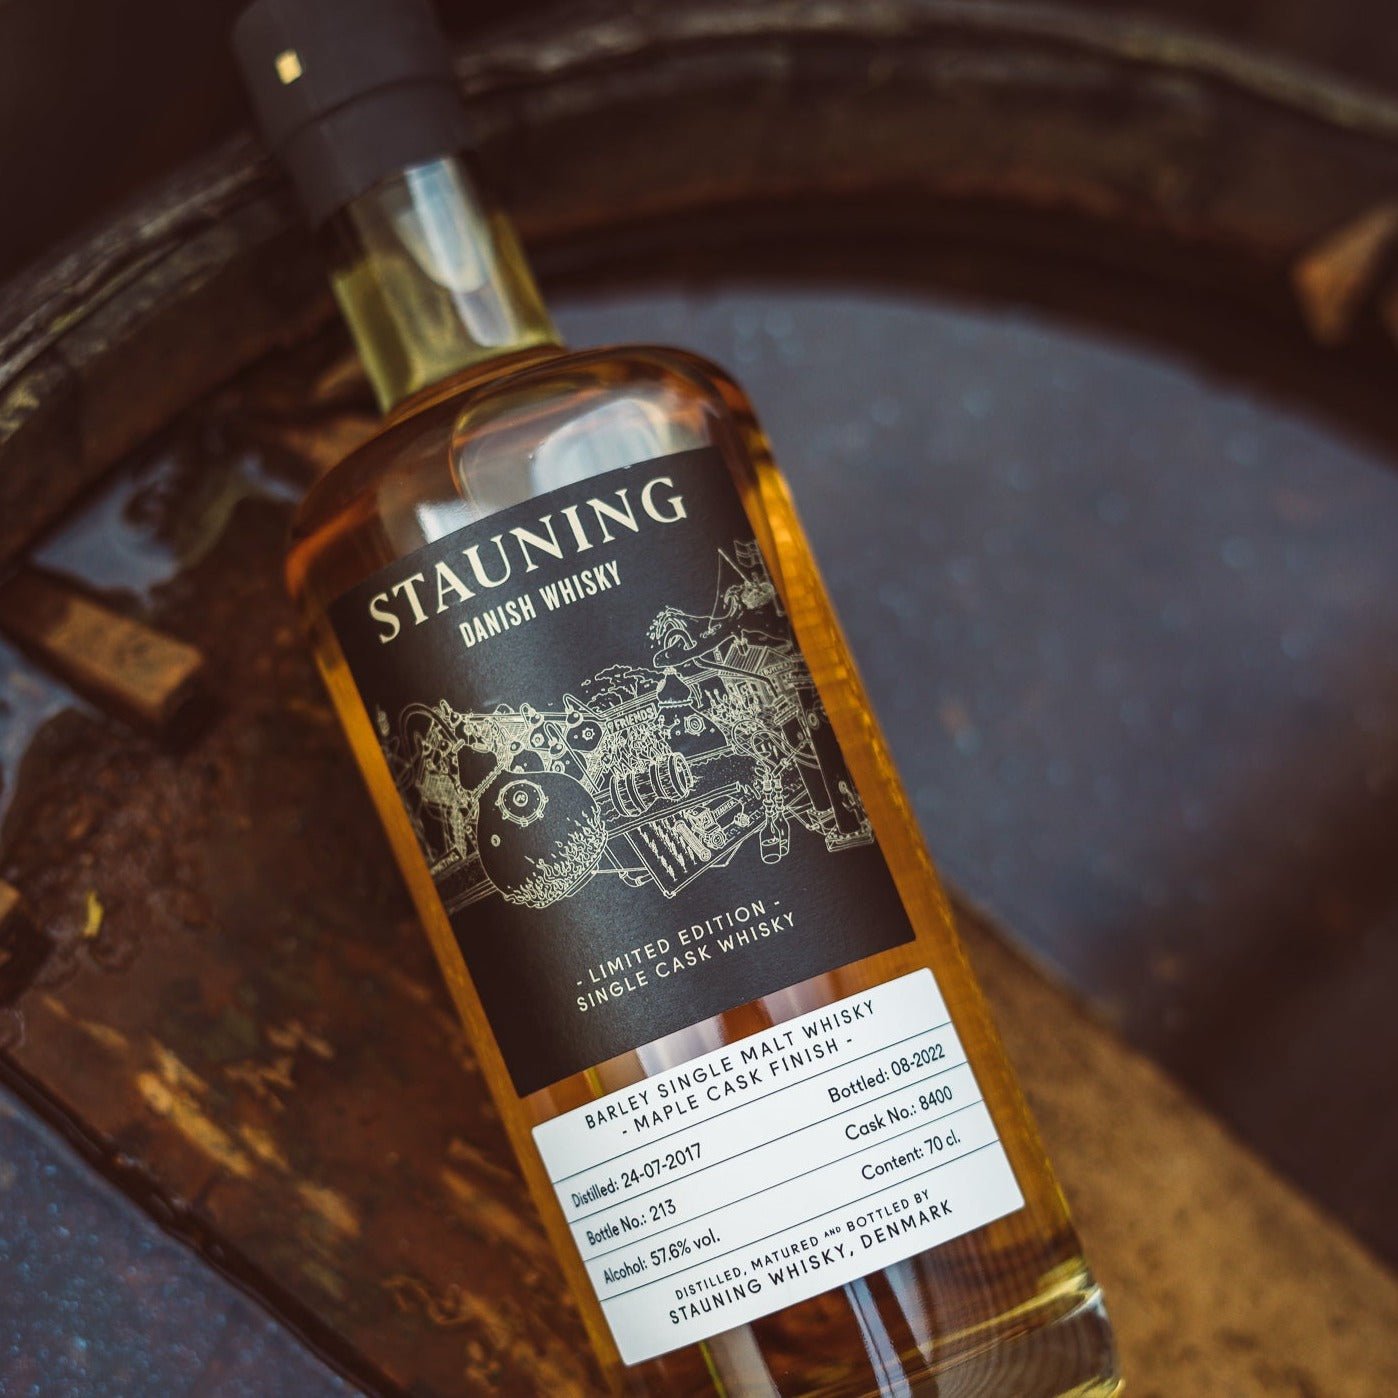 Stauning | 5 Jahre | 2017/2022 | Barley | Maple Syrup Cask #8400 | Danish Whisky | 0,7l | 57,6%GET A BOTTLE